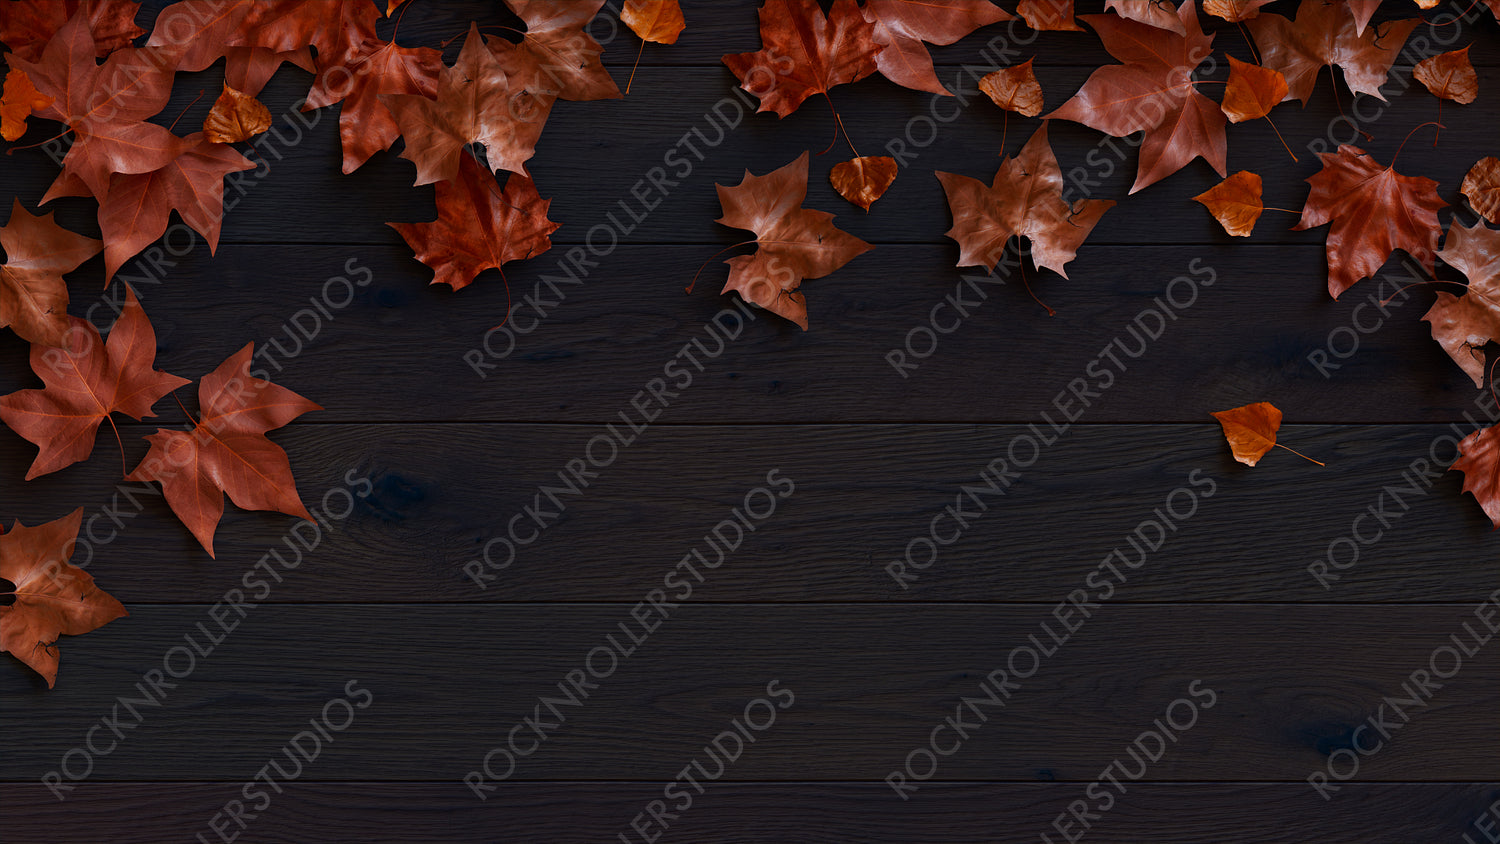 Top down view of Dark wood Tabletop with leaves.